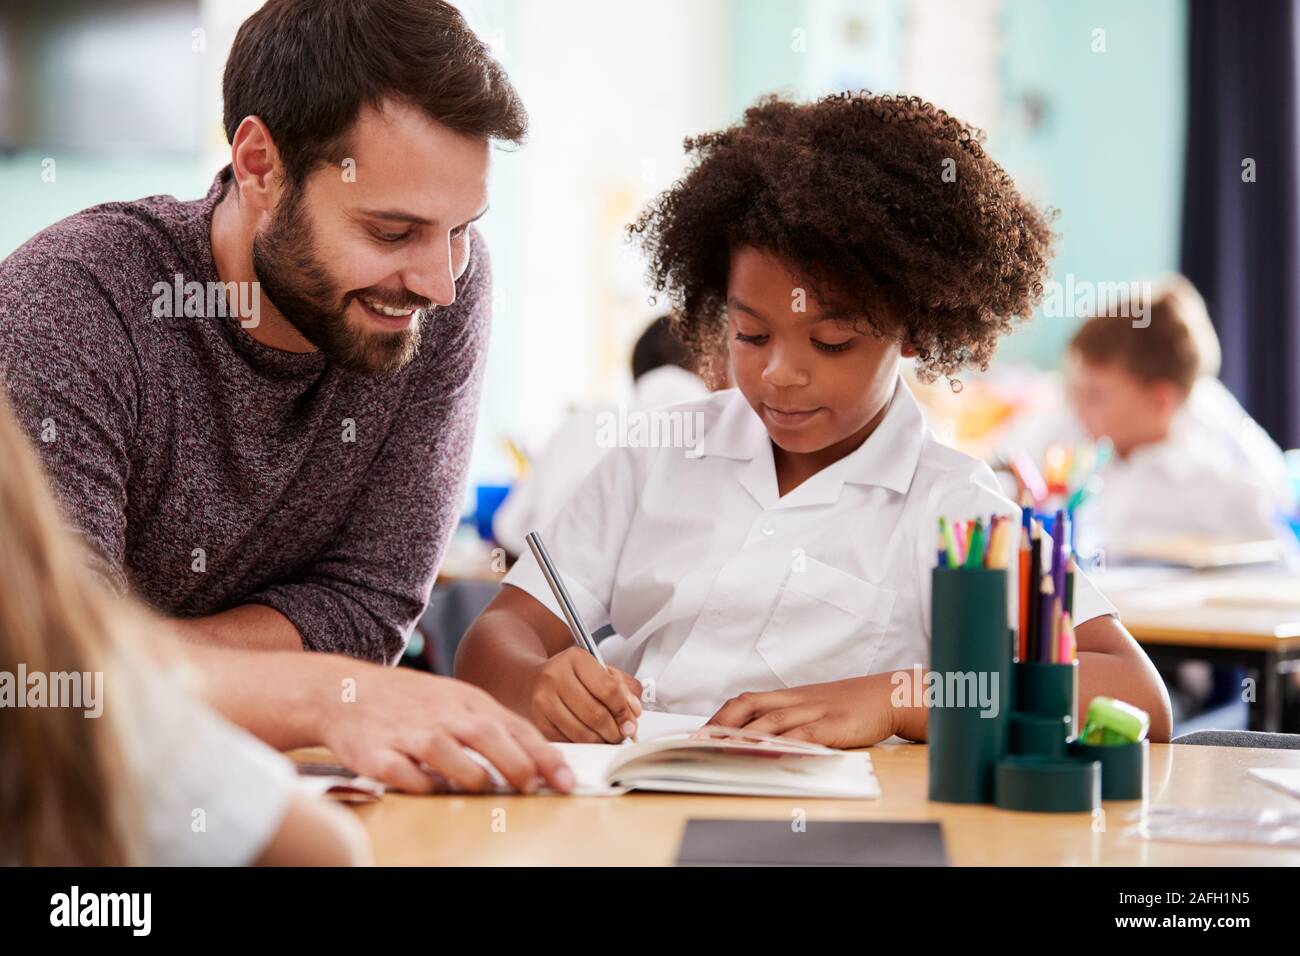 Male Elementary School Teacher Giving Female Pupil Wearing Uniform One To One Support In Classroom Stock Photo